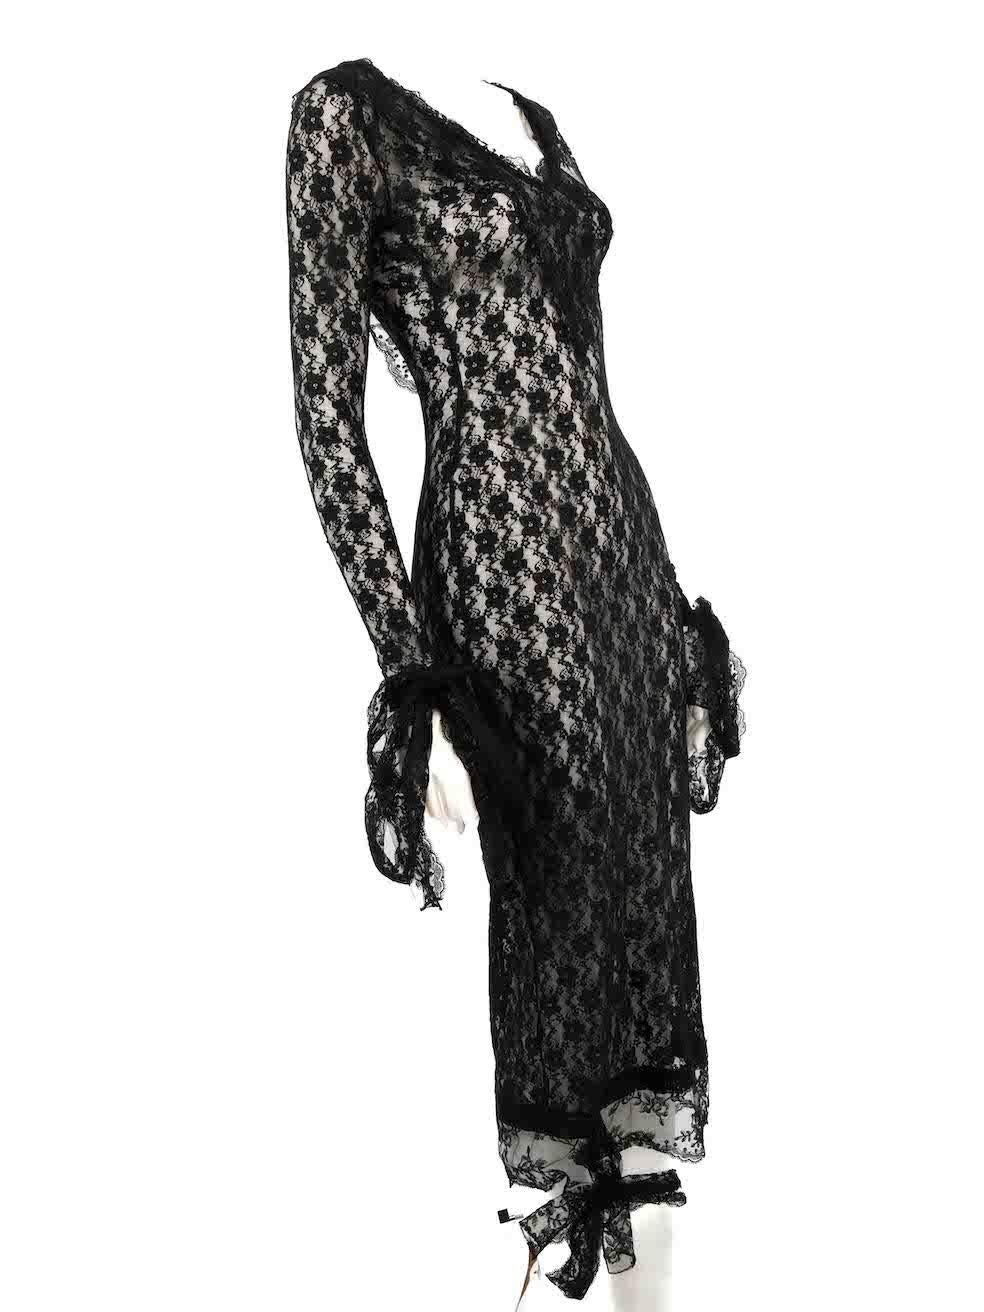 CONDITION is Very good. Hardly any wear to dress is evident on this used Christopher Kane designer resale item.
 
 
 
 Details
 
 
 Black
 
 Lace
 
 Midi dress
 
 Sheer
 
 V neckline
 
 Tie strap detail on cuffs and hem
 
 Back zip closure with hook